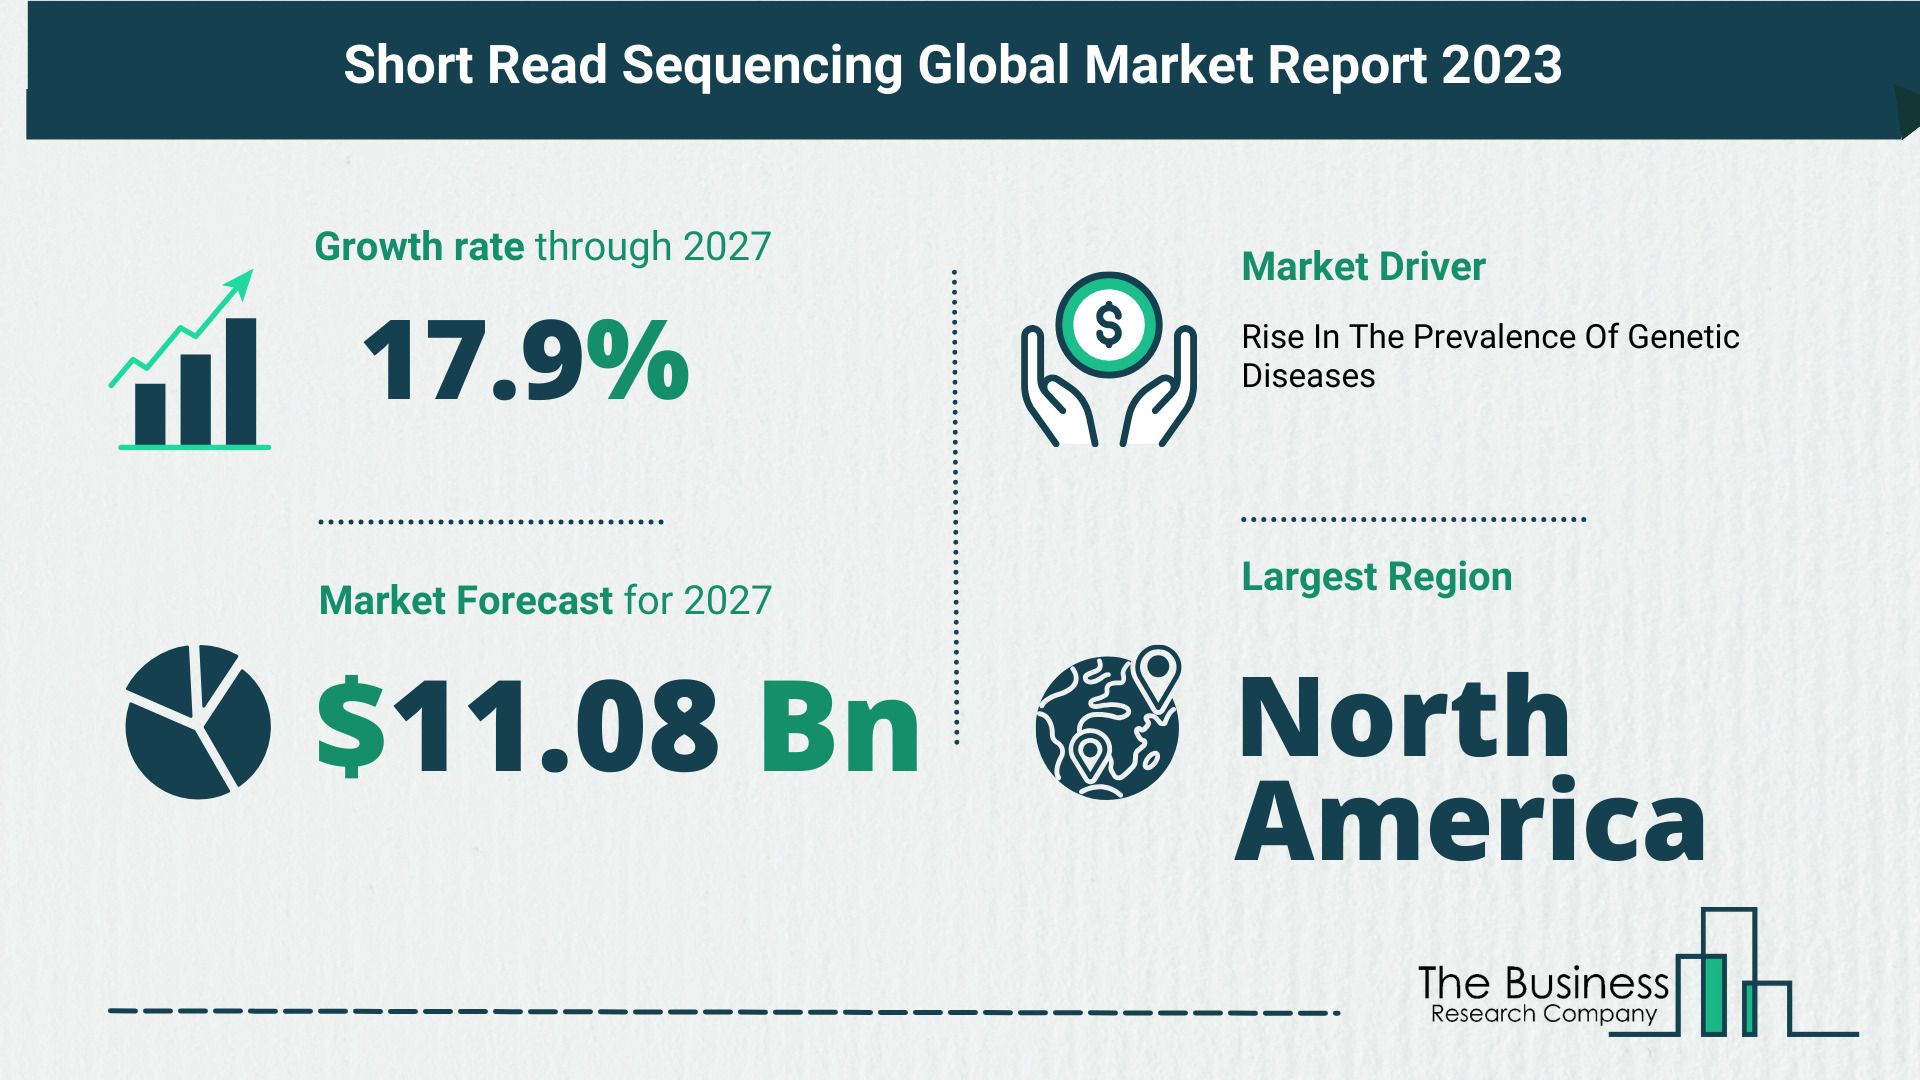 Understand How The Short Read Sequencing Market Is Poised To Grow Through 2023-2032